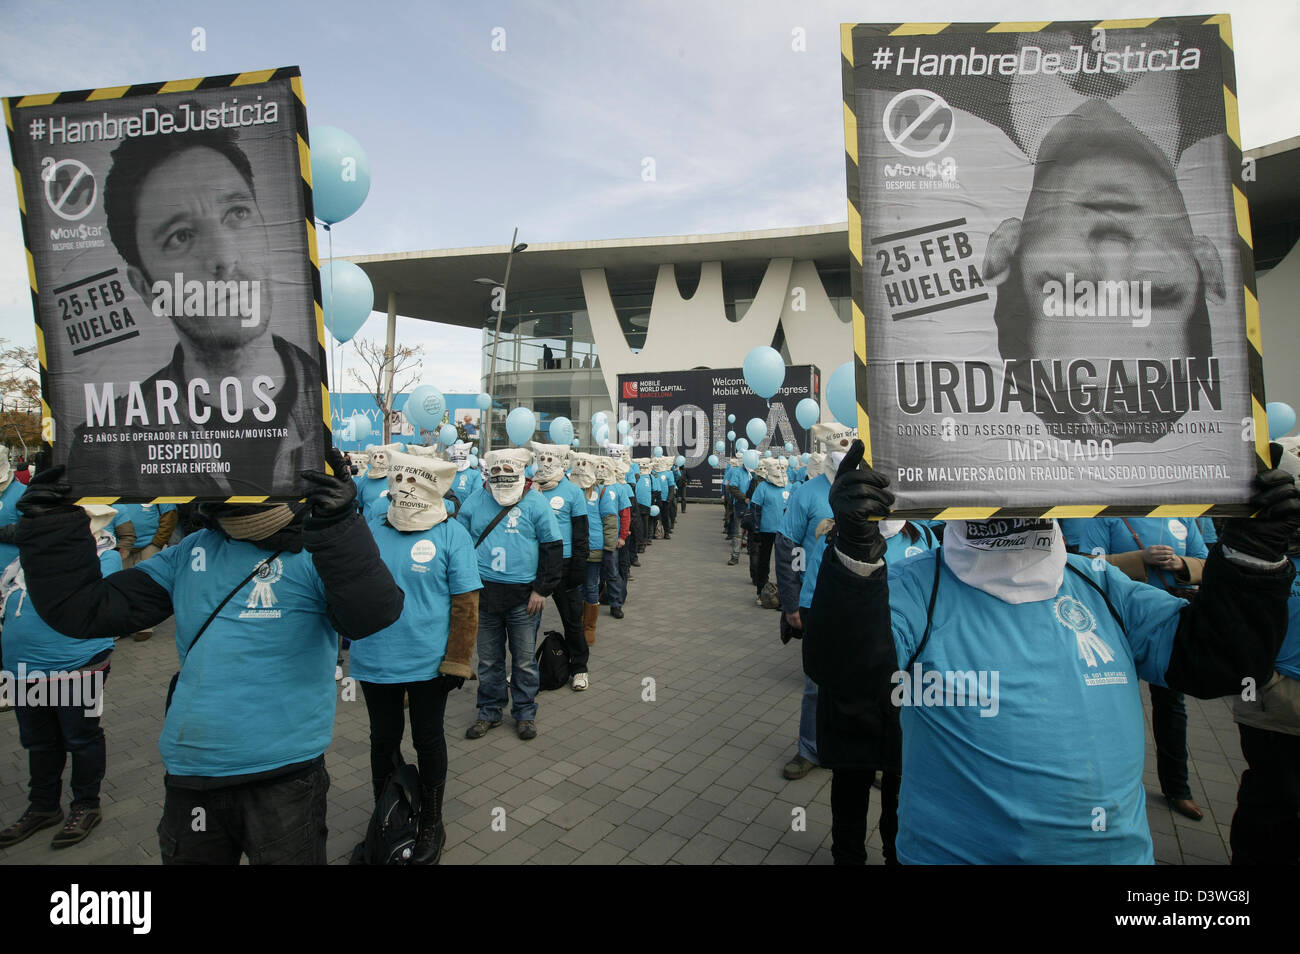 Barcelona, Spain. 25th February 2013. Flashmob by Telefonica Movistar workers against dismissions, during the opening day of the Mobile World congress that takes place in Barcelona, Spain. Credit:  esteban mora / Alamy Live News Stock Photo